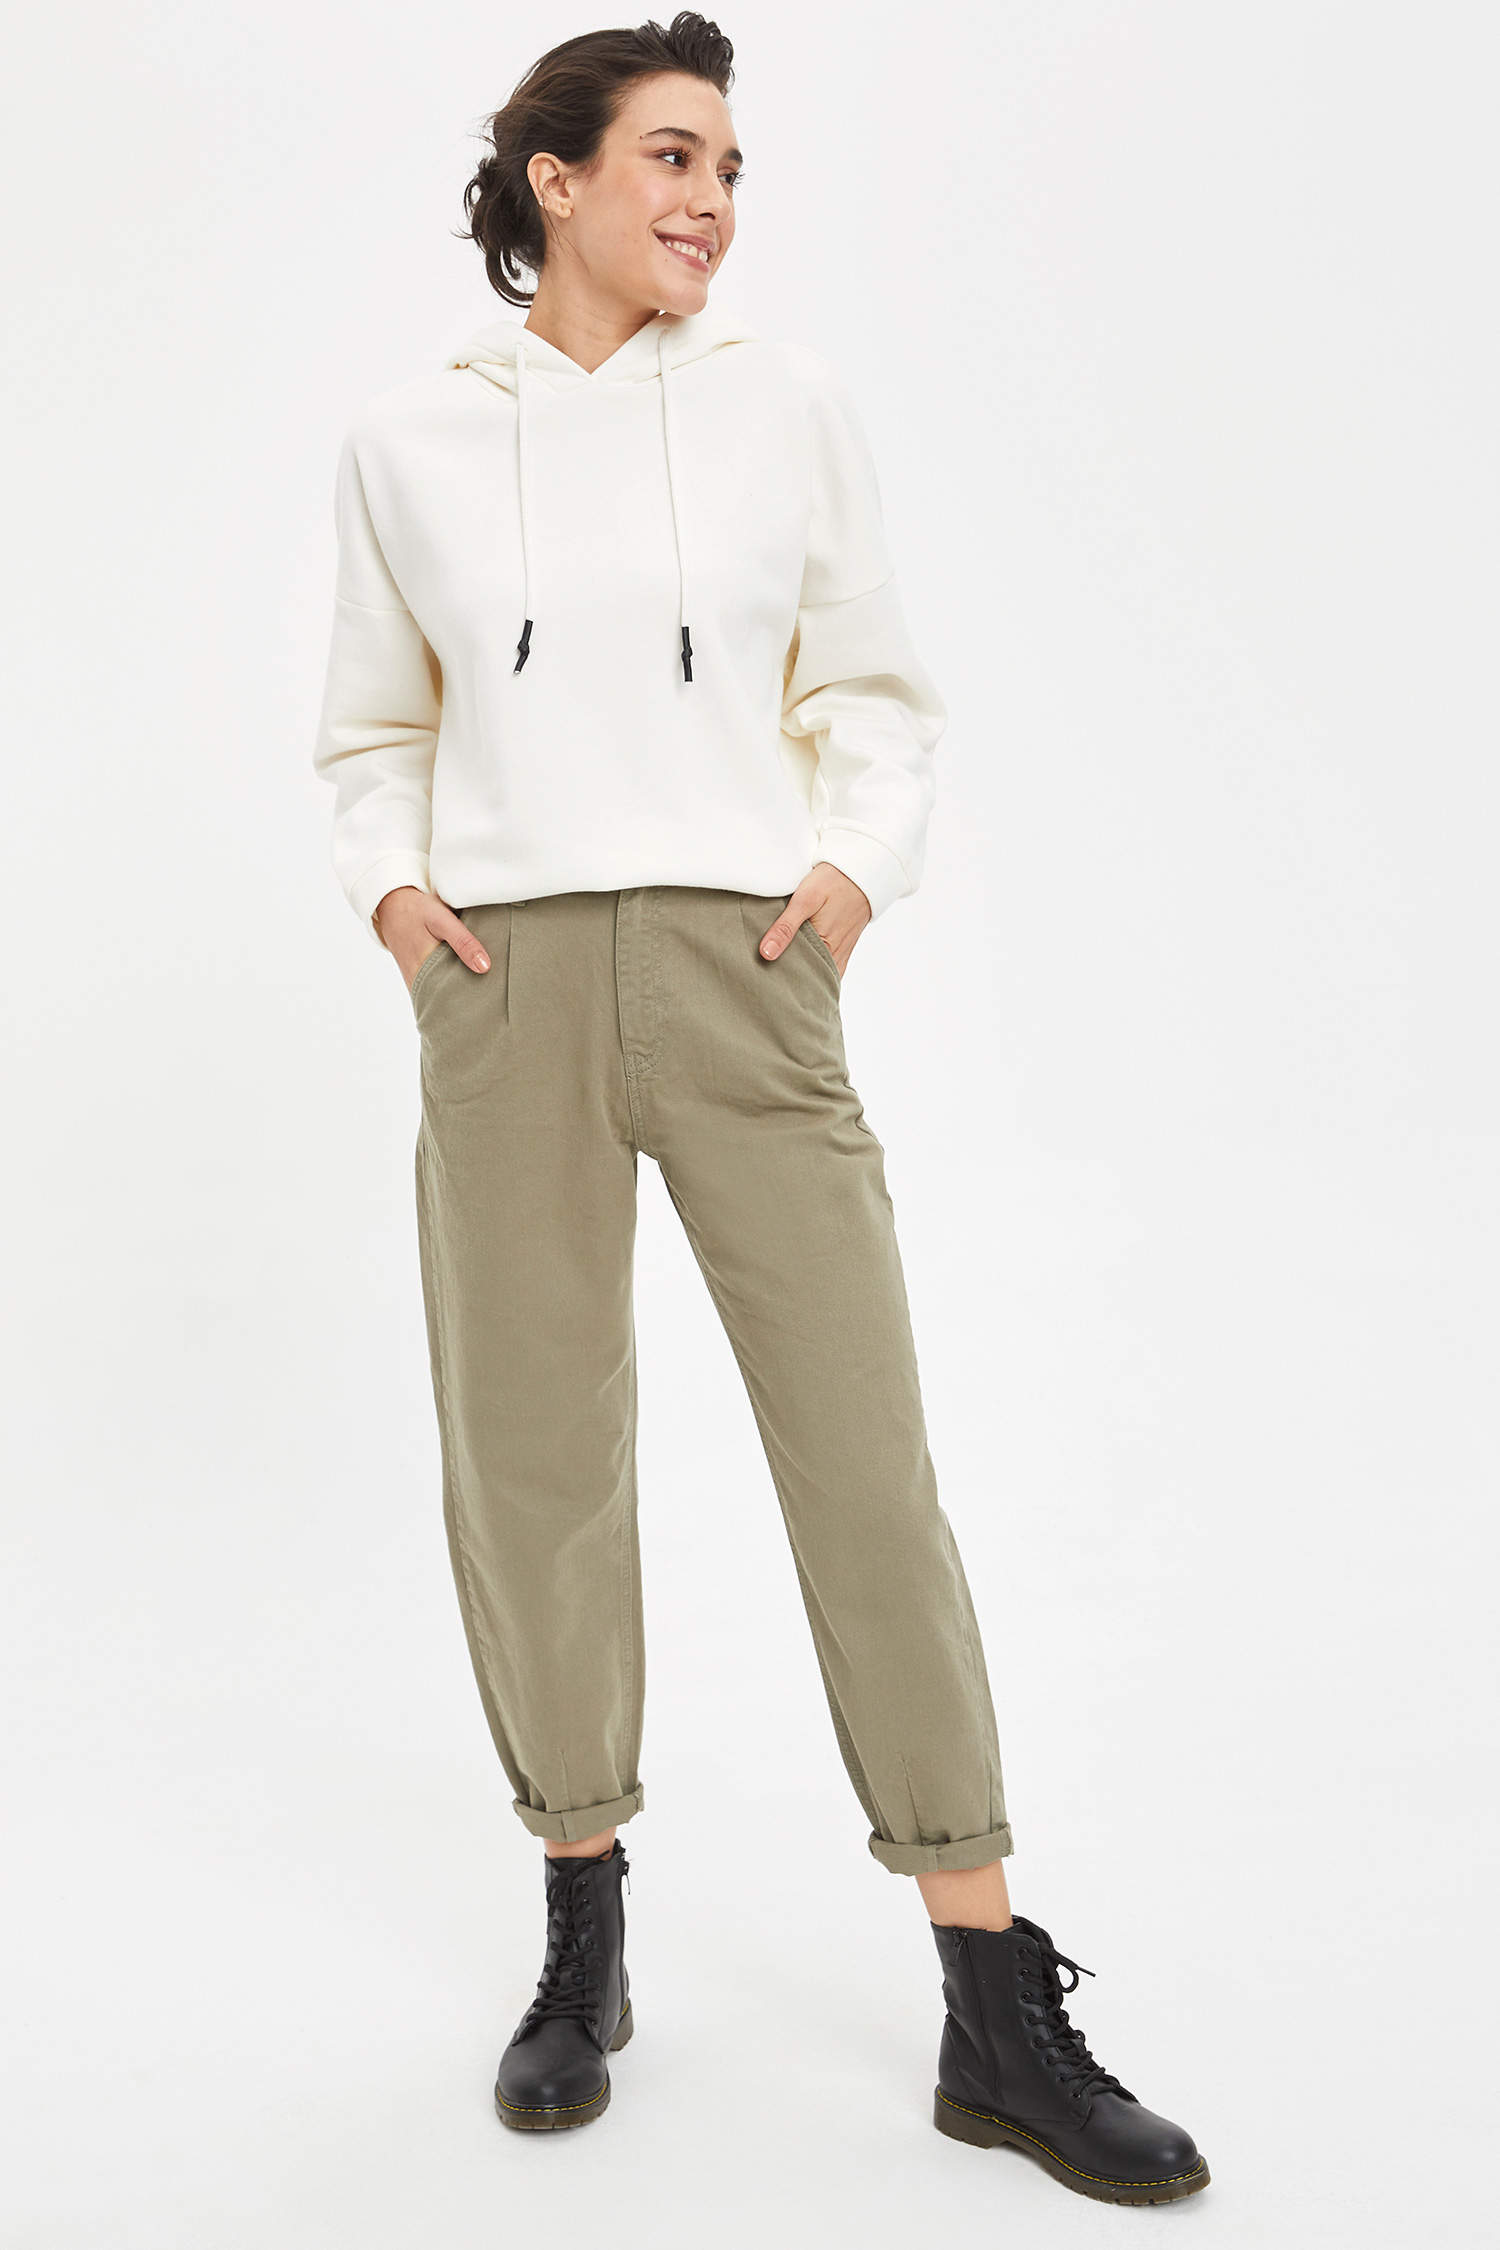 Boohoo Slouchy Relaxed Fit Wide Leg Dress Pants in White | Lyst Canada